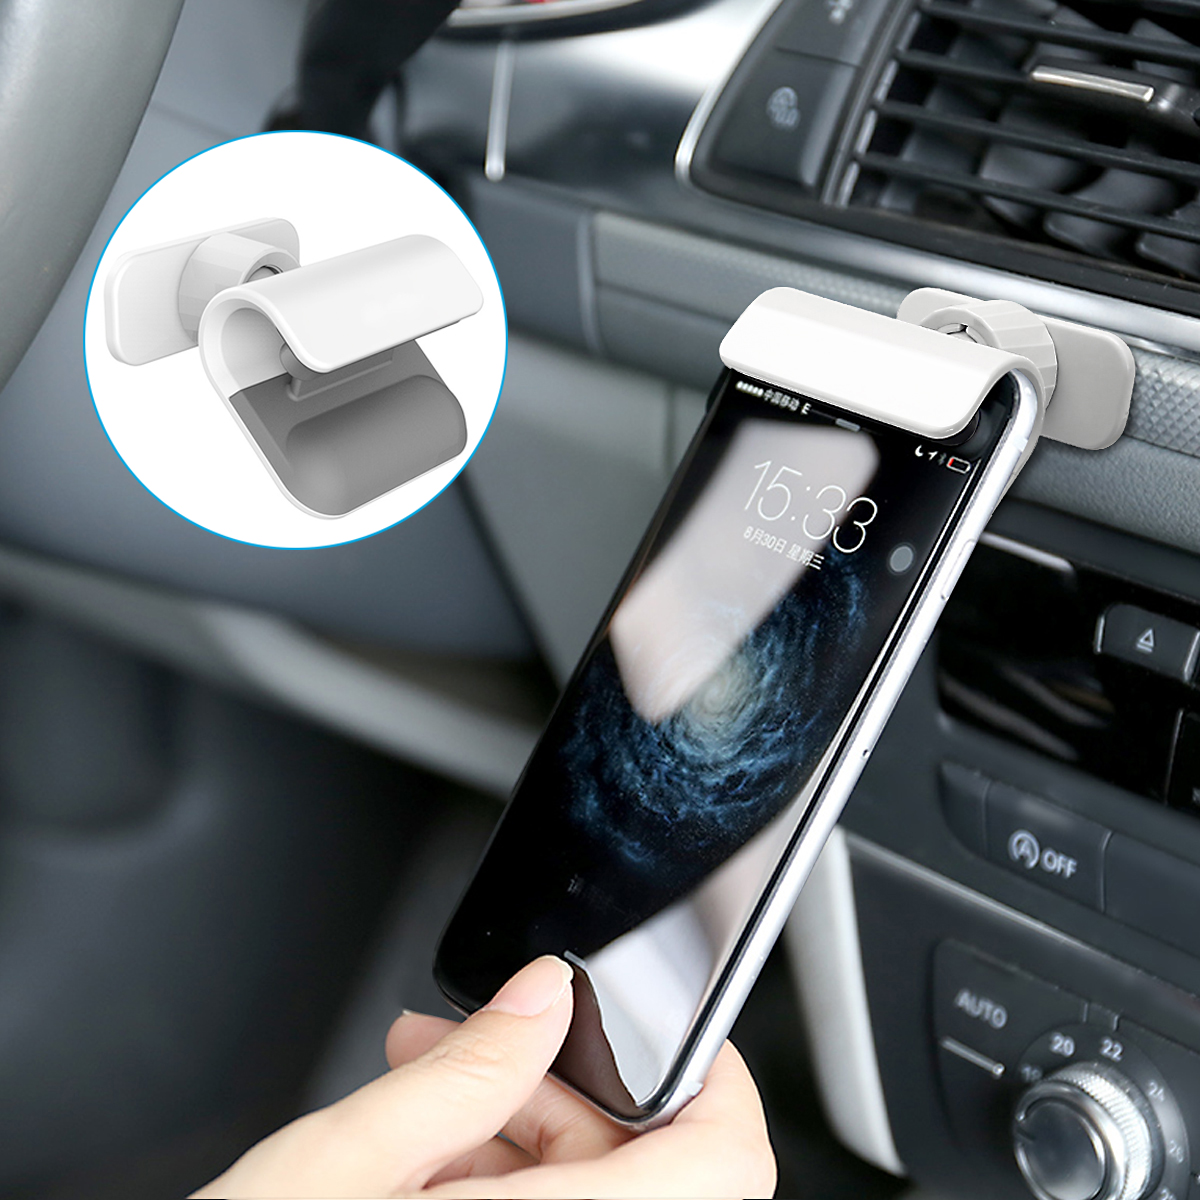 

Universal Powerful Sticky 360 Degree Rotation Car Holder for iPhone Xiaomi Mobile Phone